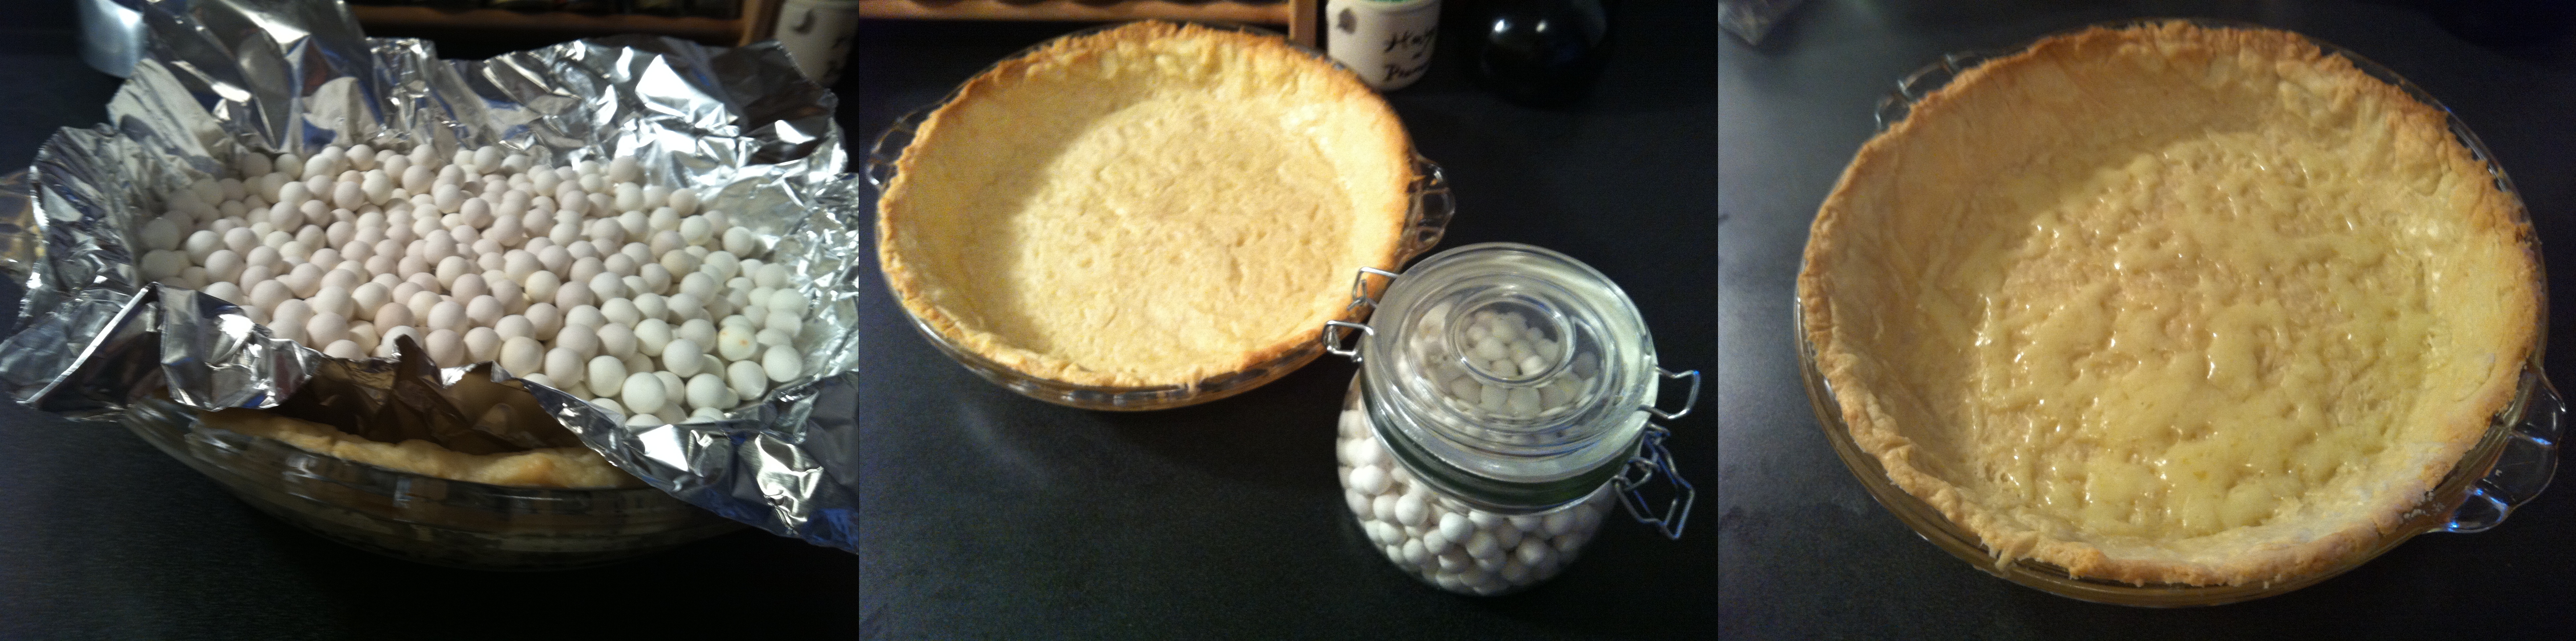 Blind baking the crust; blind-baked crust and pie beads; after blind baking with cheese